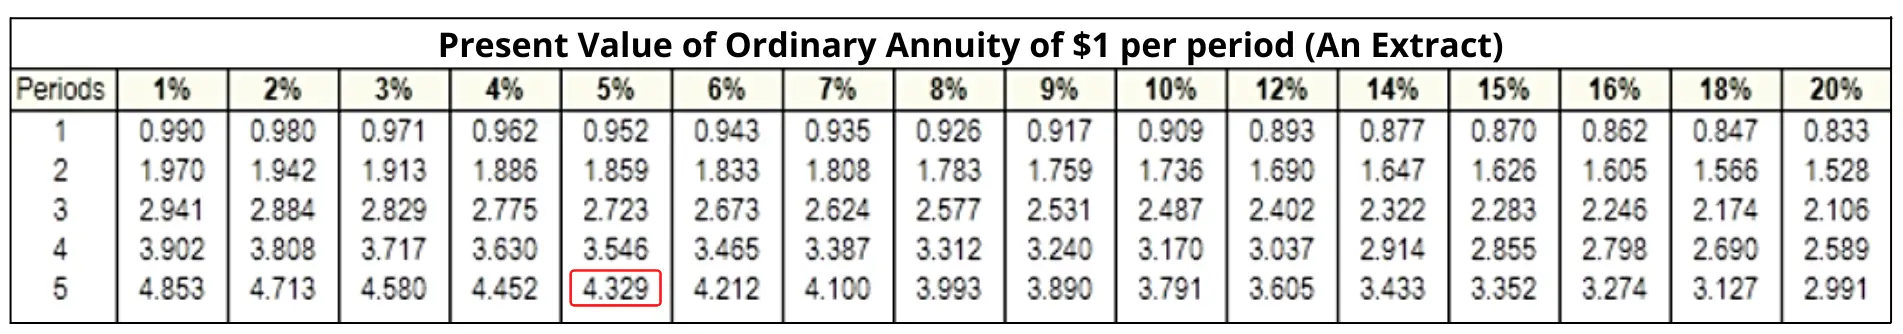 annuity table to look for the present value of $1 after 5 years